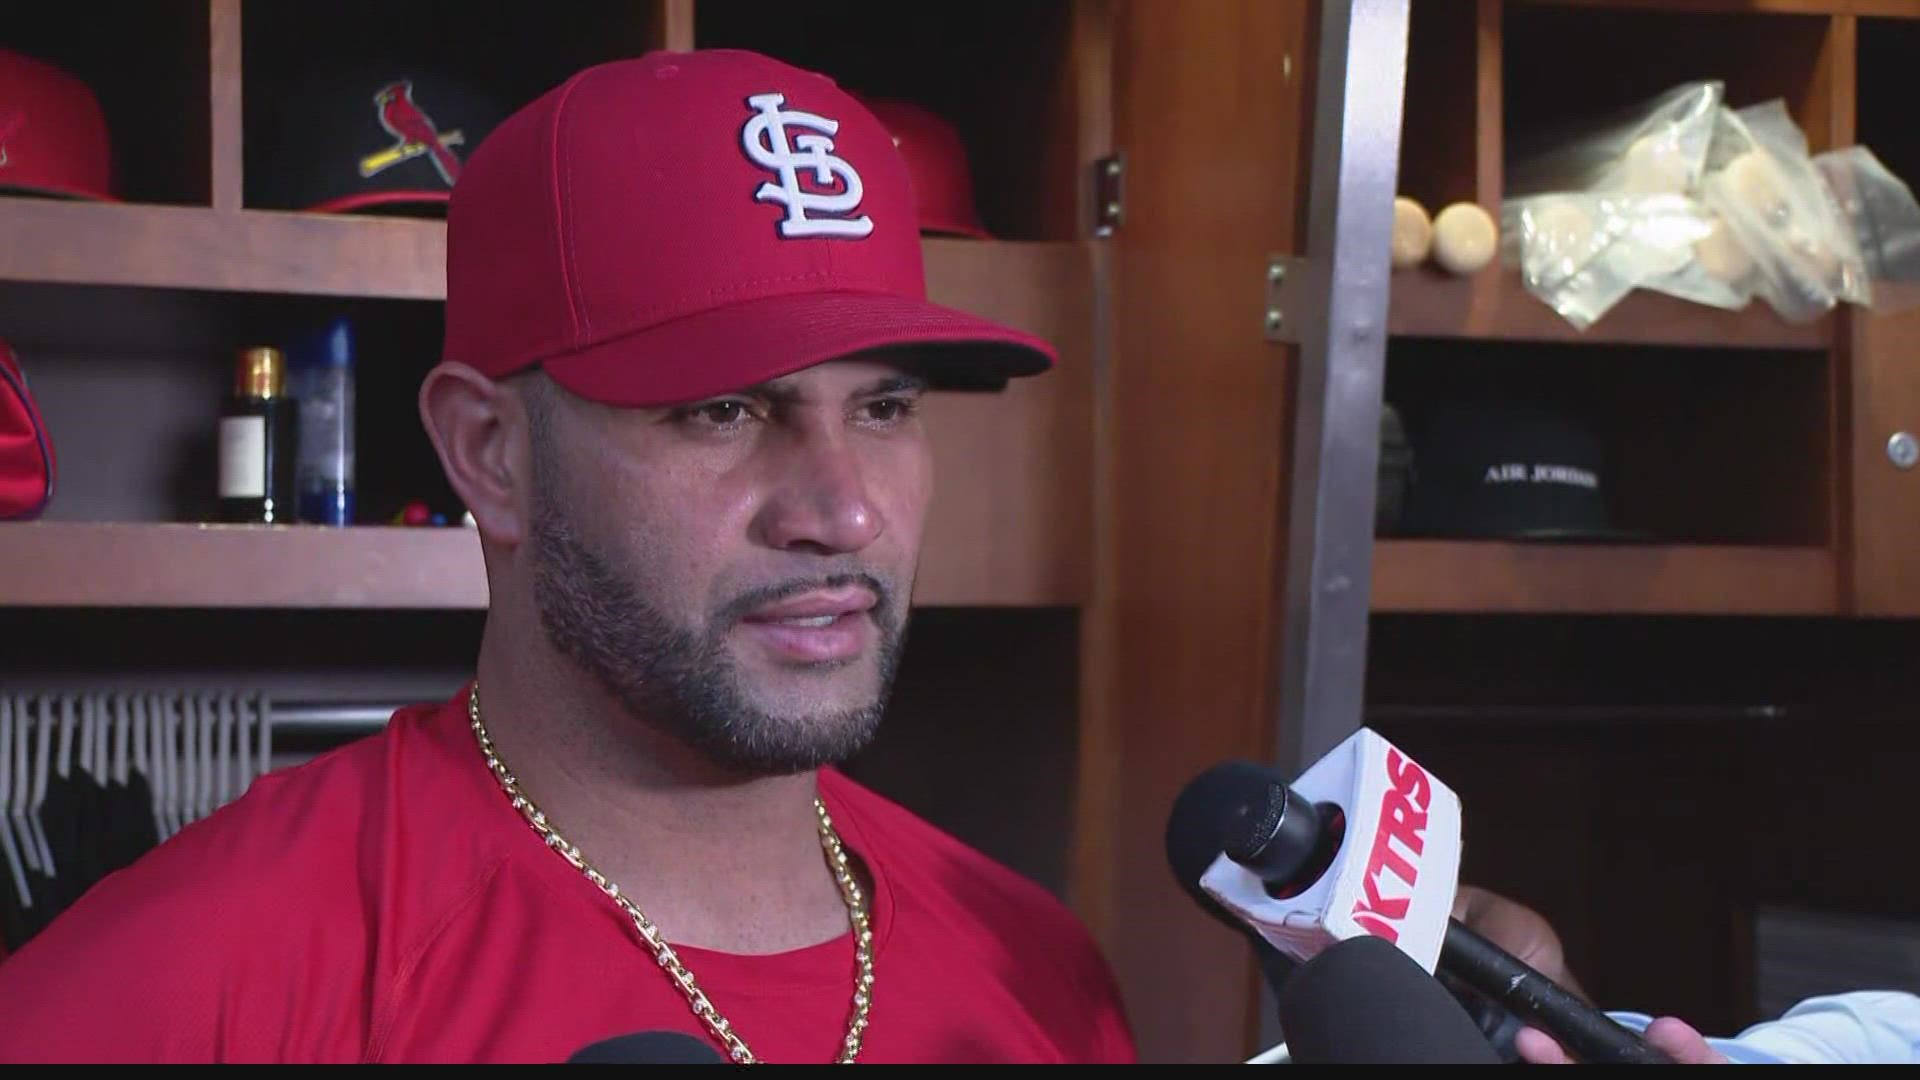 Pujols was named as a special selection from the commissioner's office.